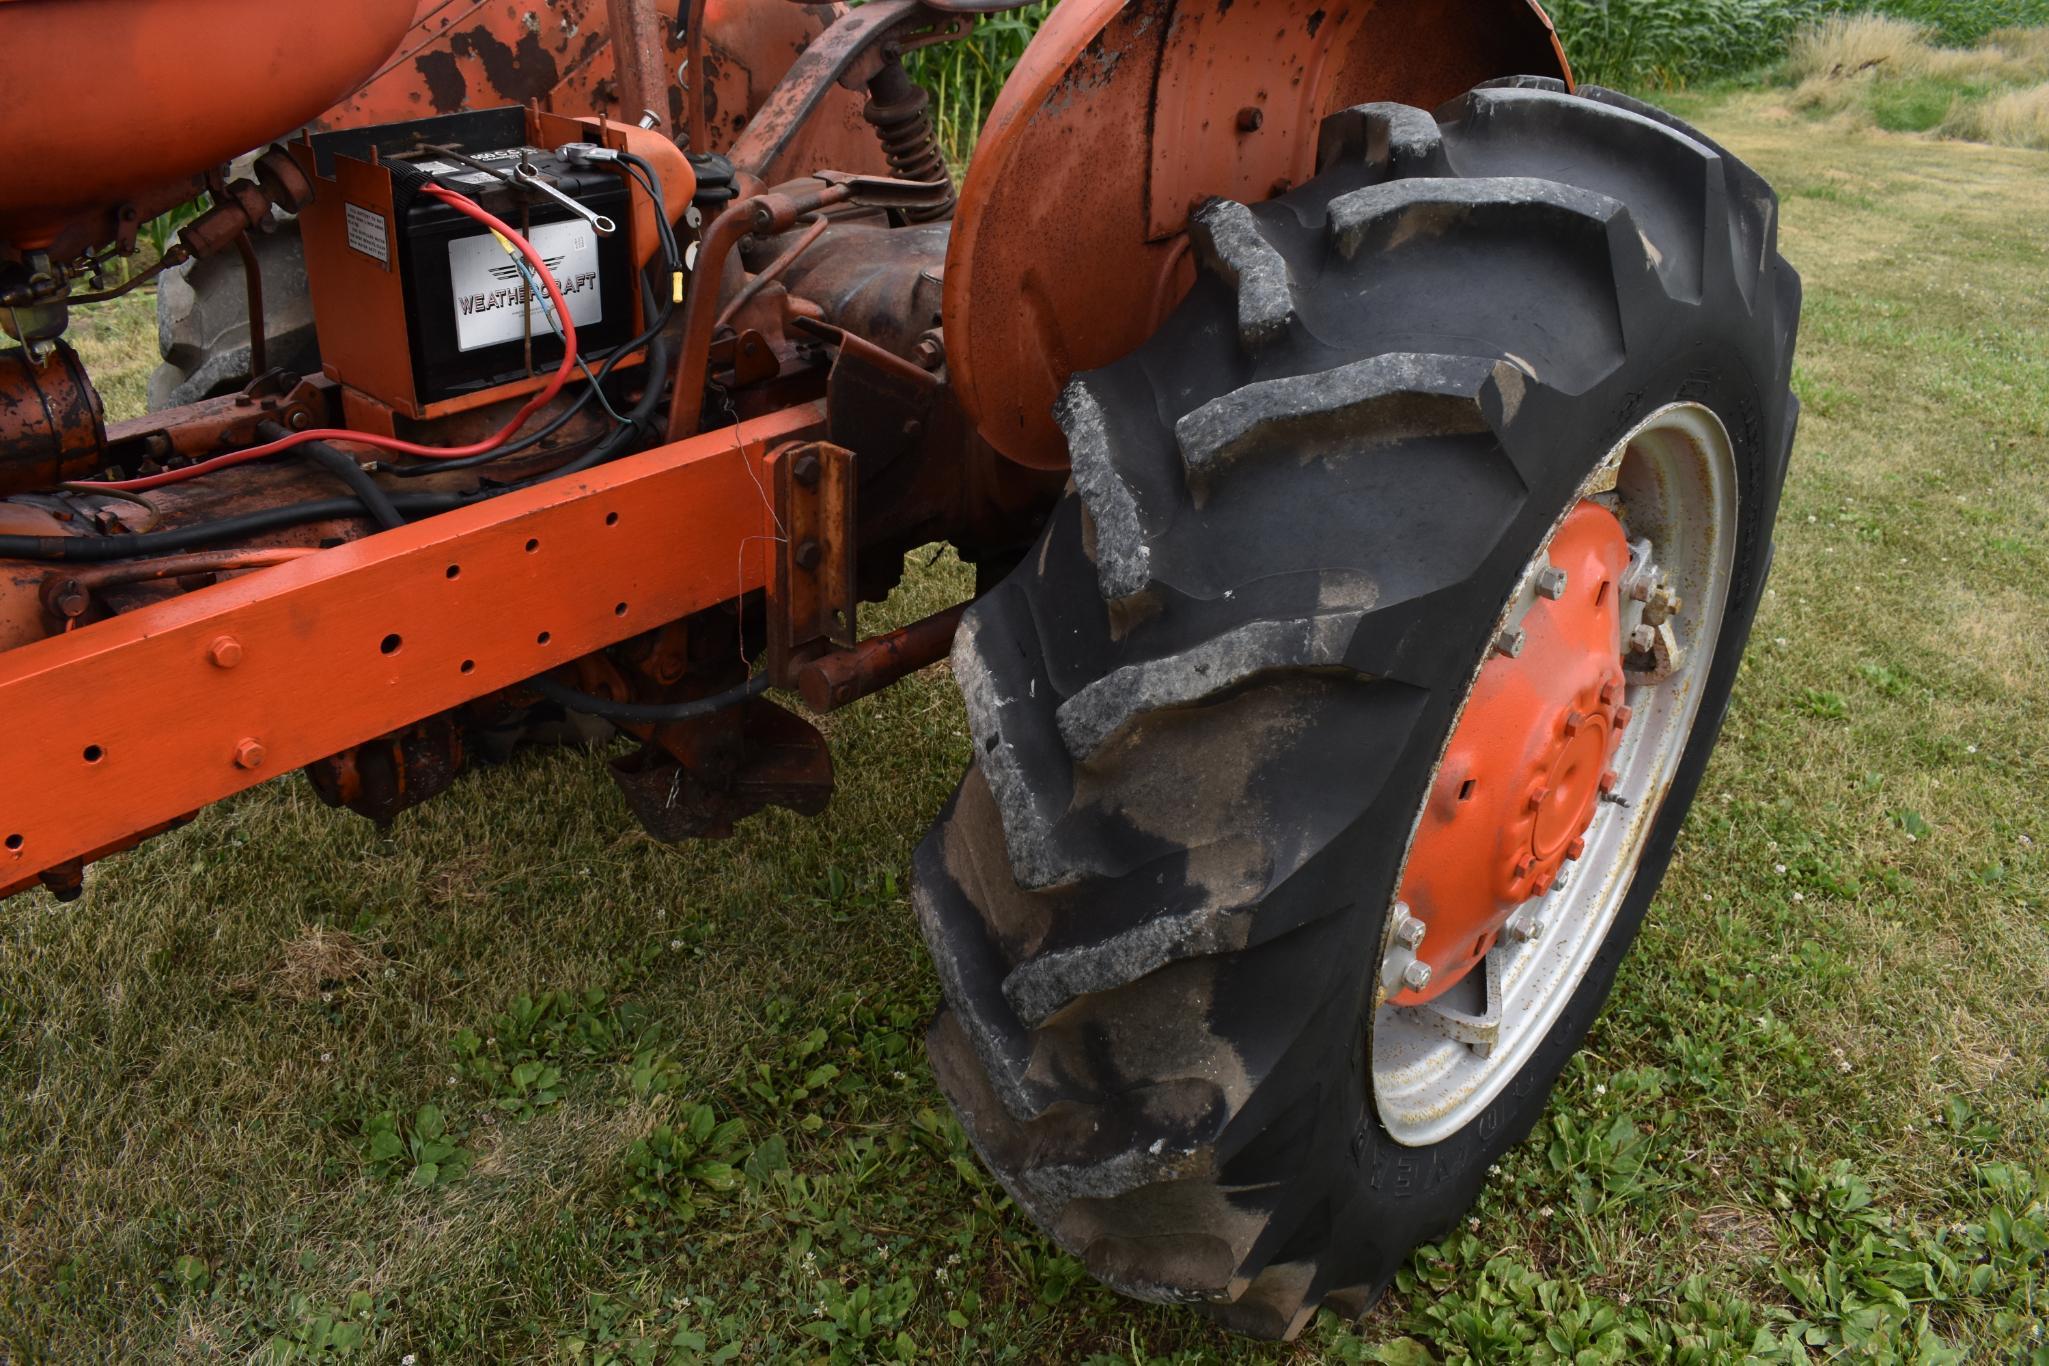 1954 Allis Chalmers WD 45 tractor